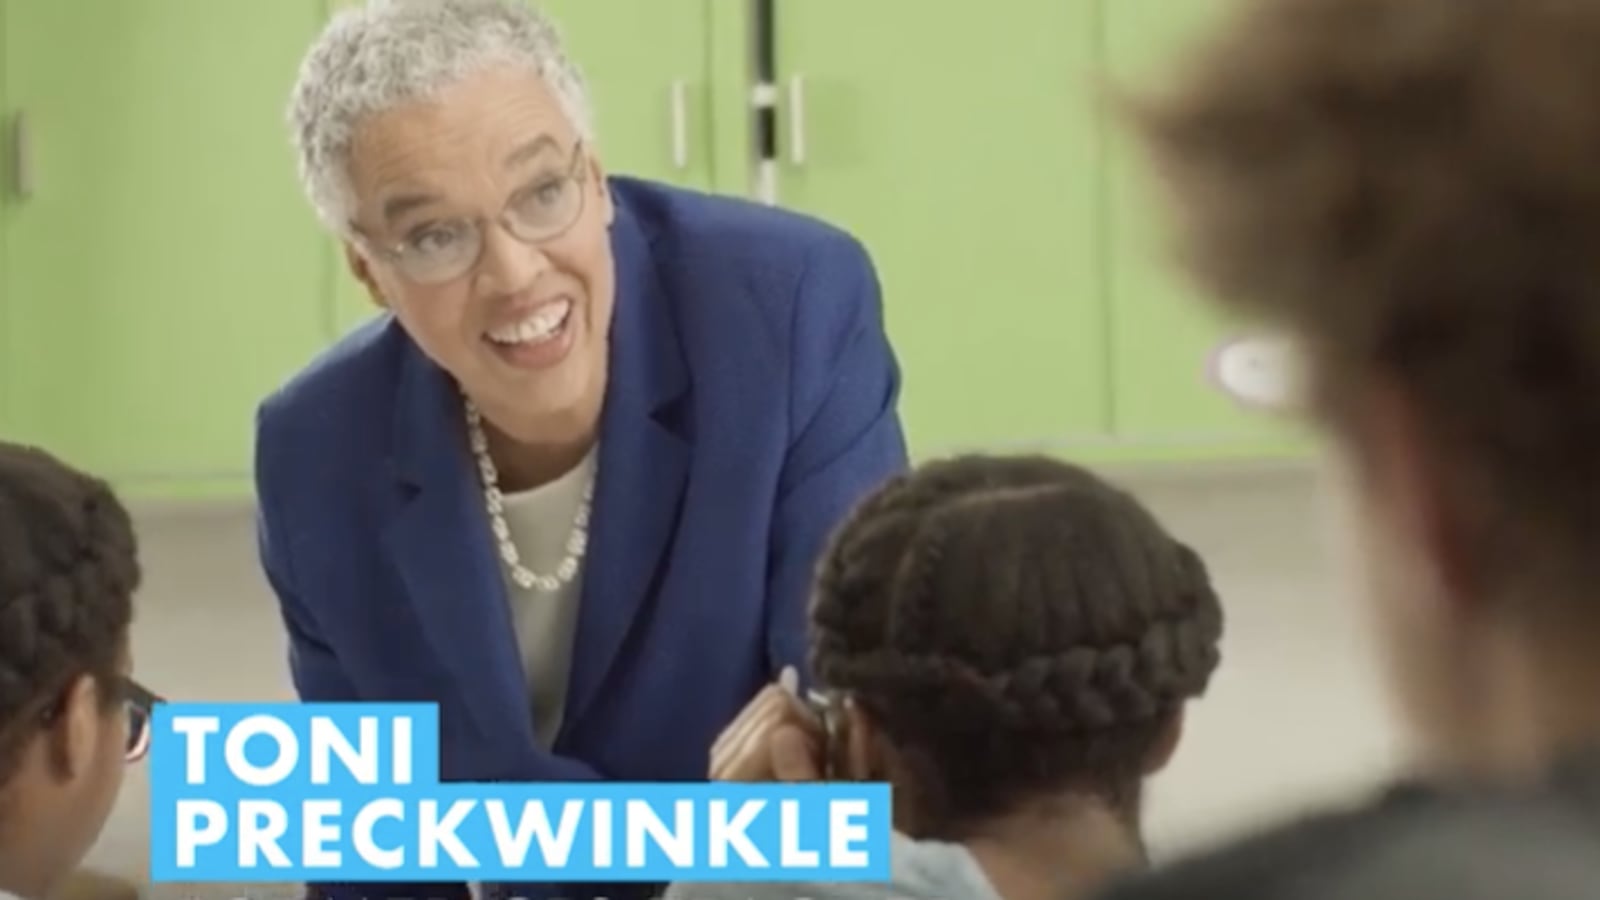 Cook County Board President Toni Preckwinkle this week aired her third advertisement of election season, “Mrs. Preckwinkle."